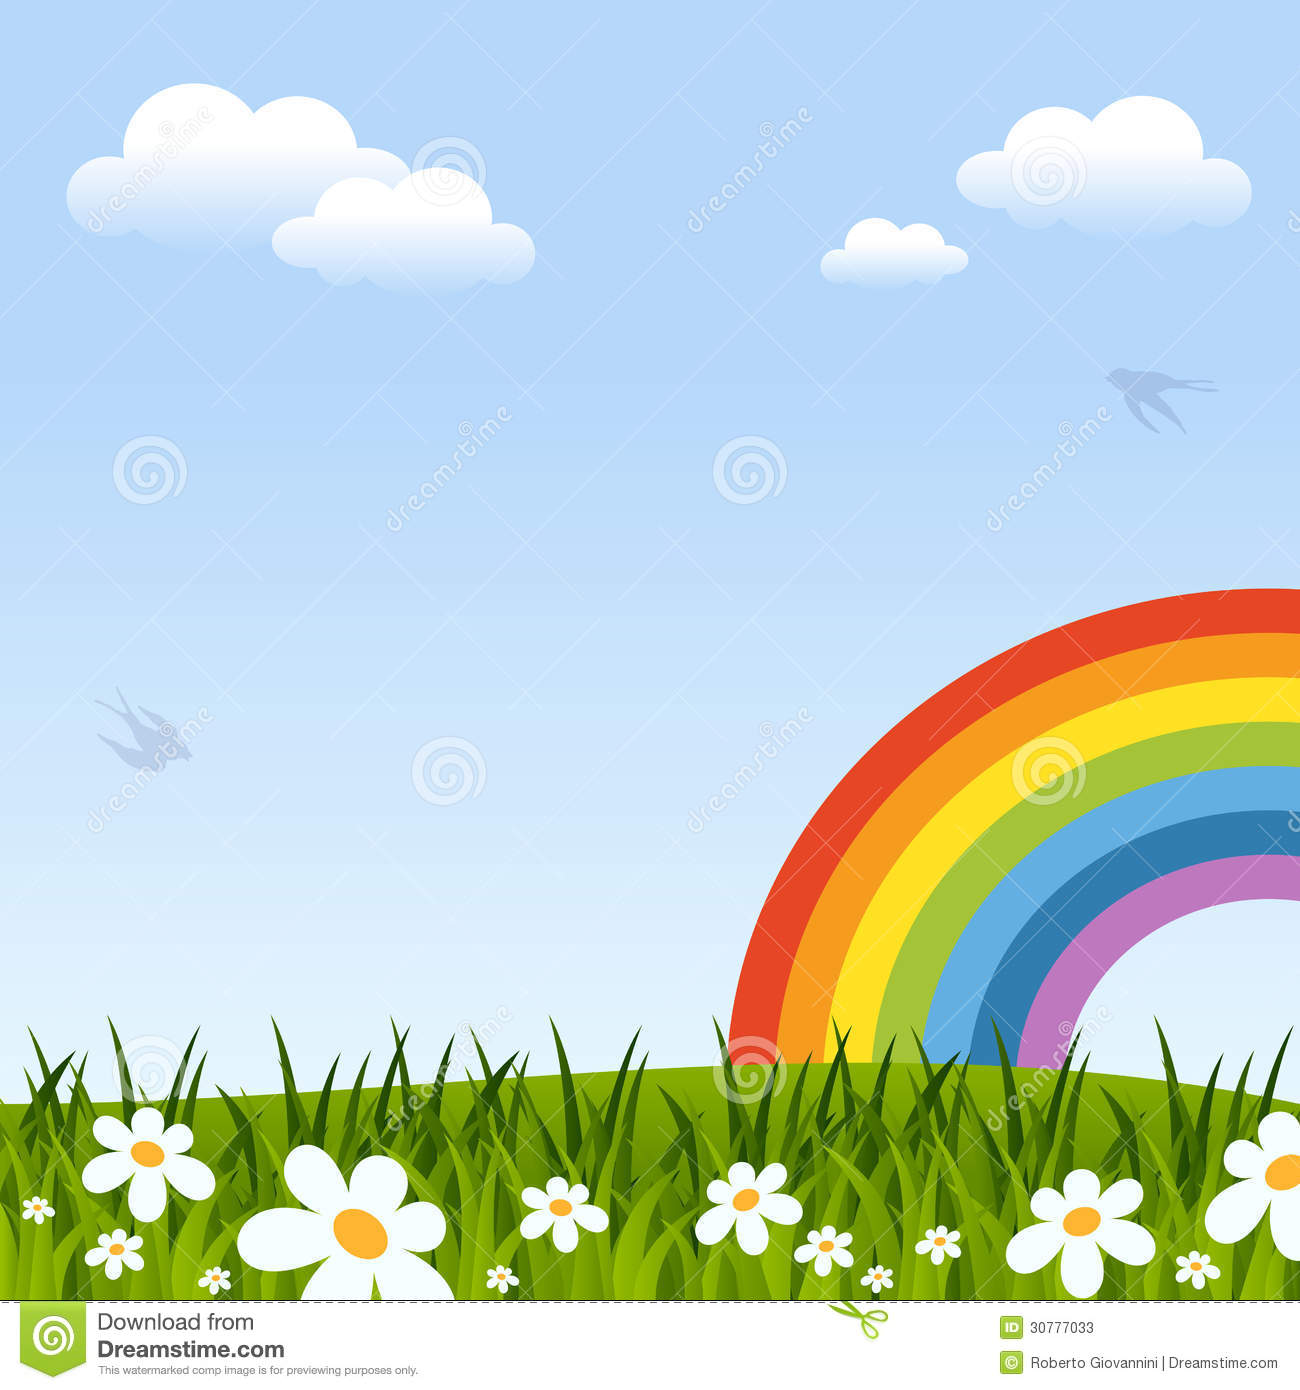 spring clipart background - photo #16